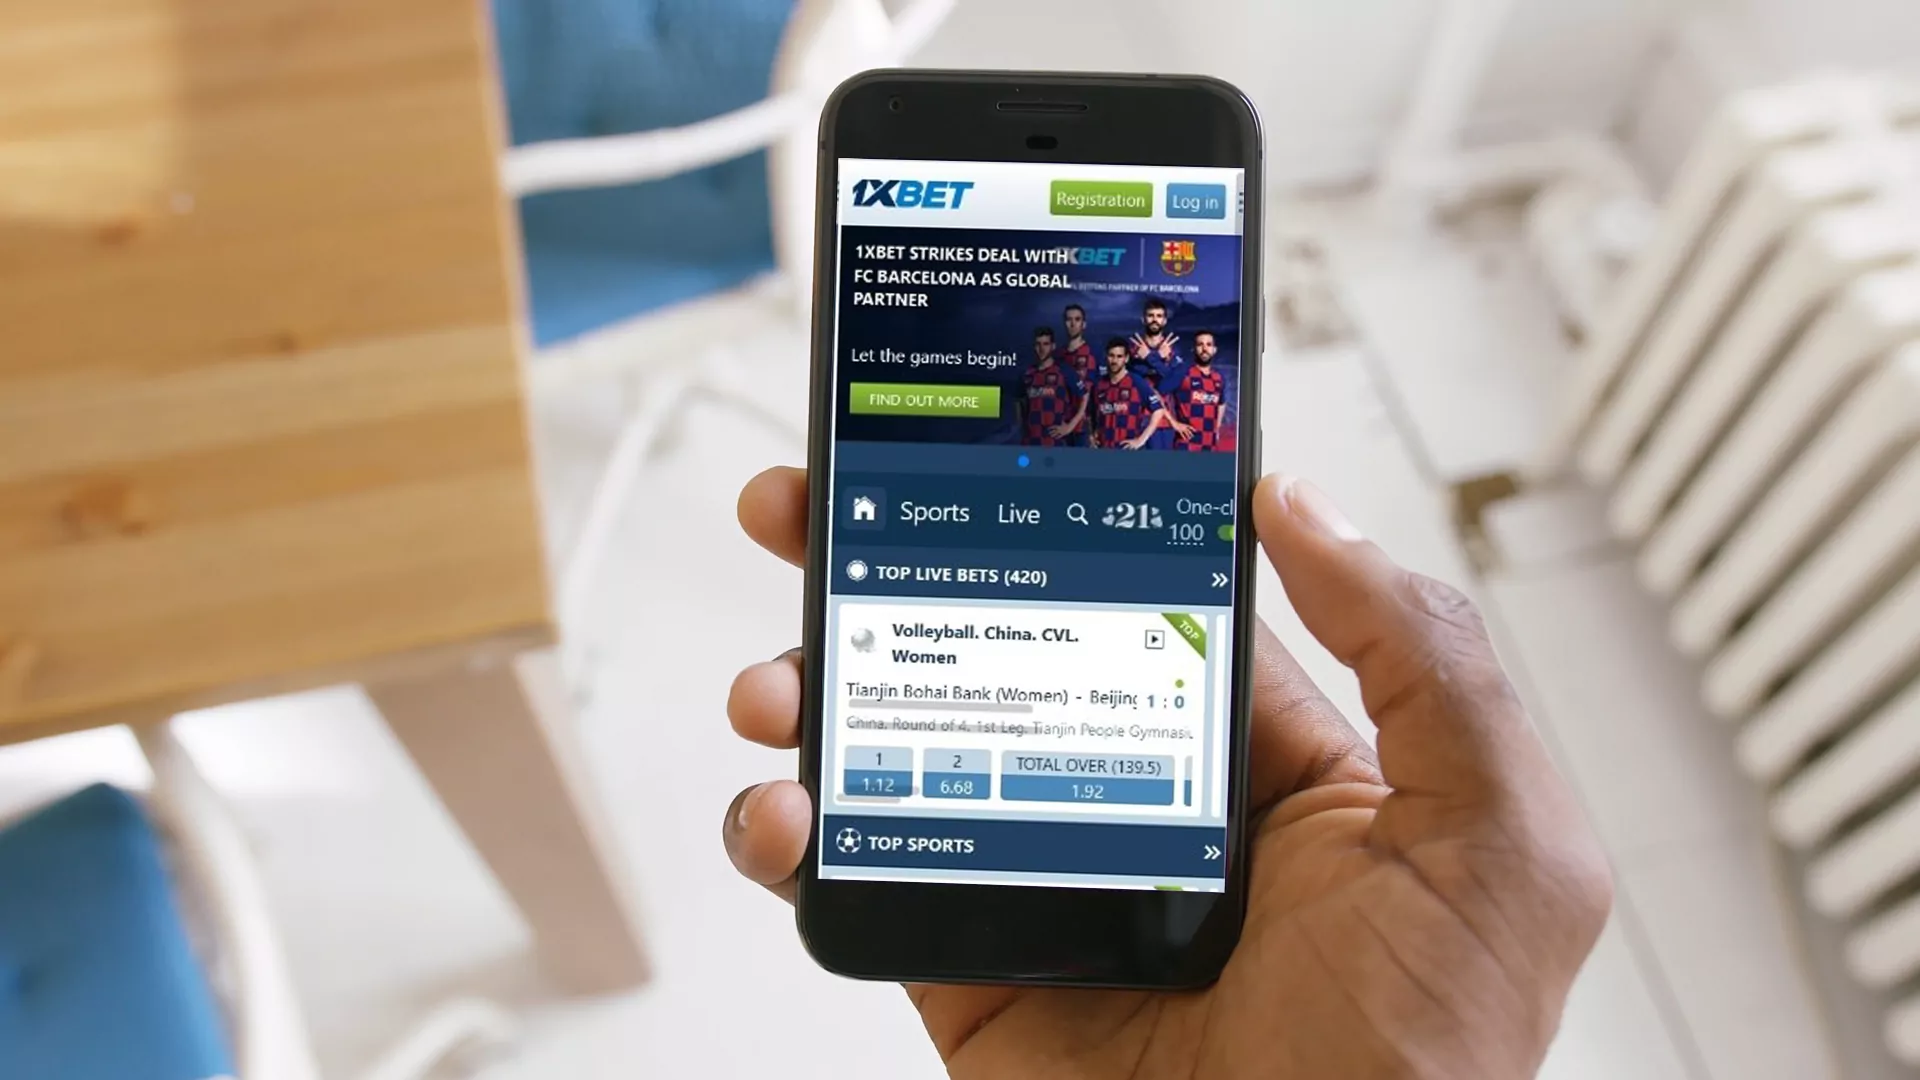 The mobile version of the 1xBet website includes all the functionality of the app.